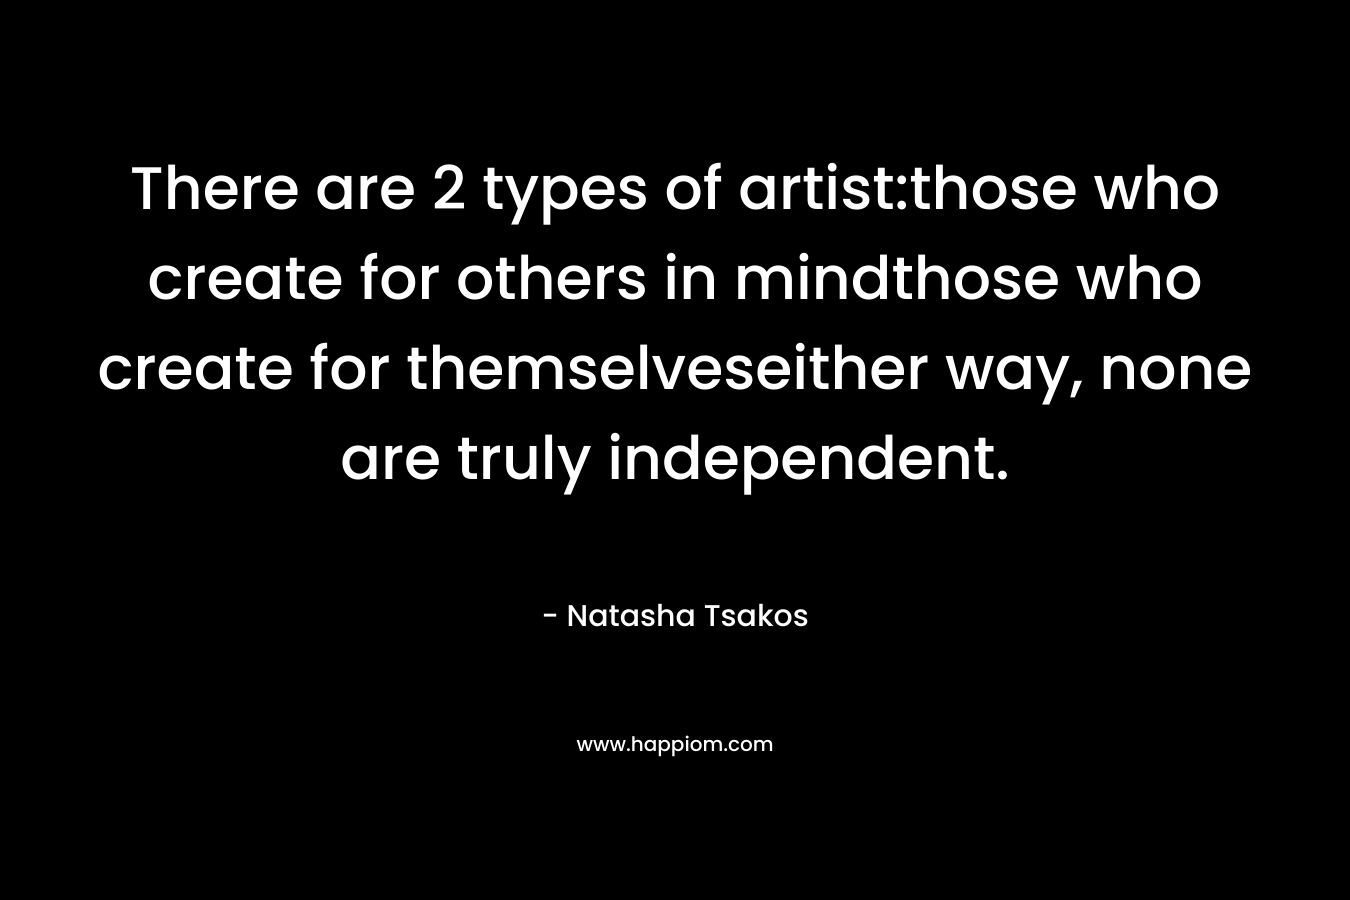 There are 2 types of artist:those who create for others in mindthose who create for themselveseither way, none are truly independent. – Natasha Tsakos